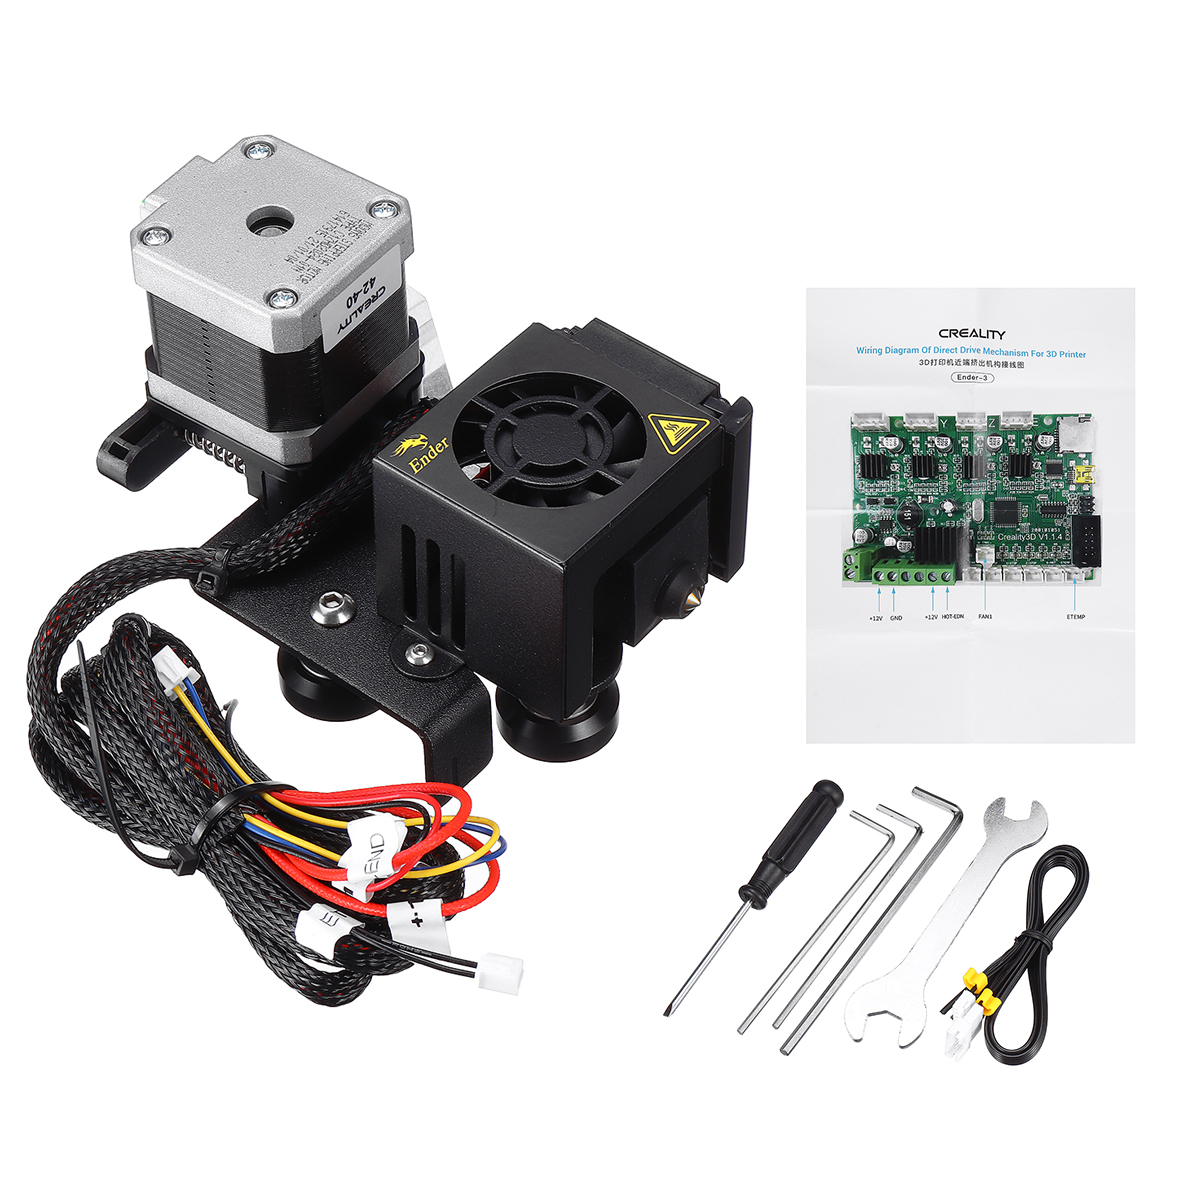 Creality 3D® Ender-3 Direct Drive Extruding Kit Mechanism Complete Extruder Nozzle Kit with Stepper Motor